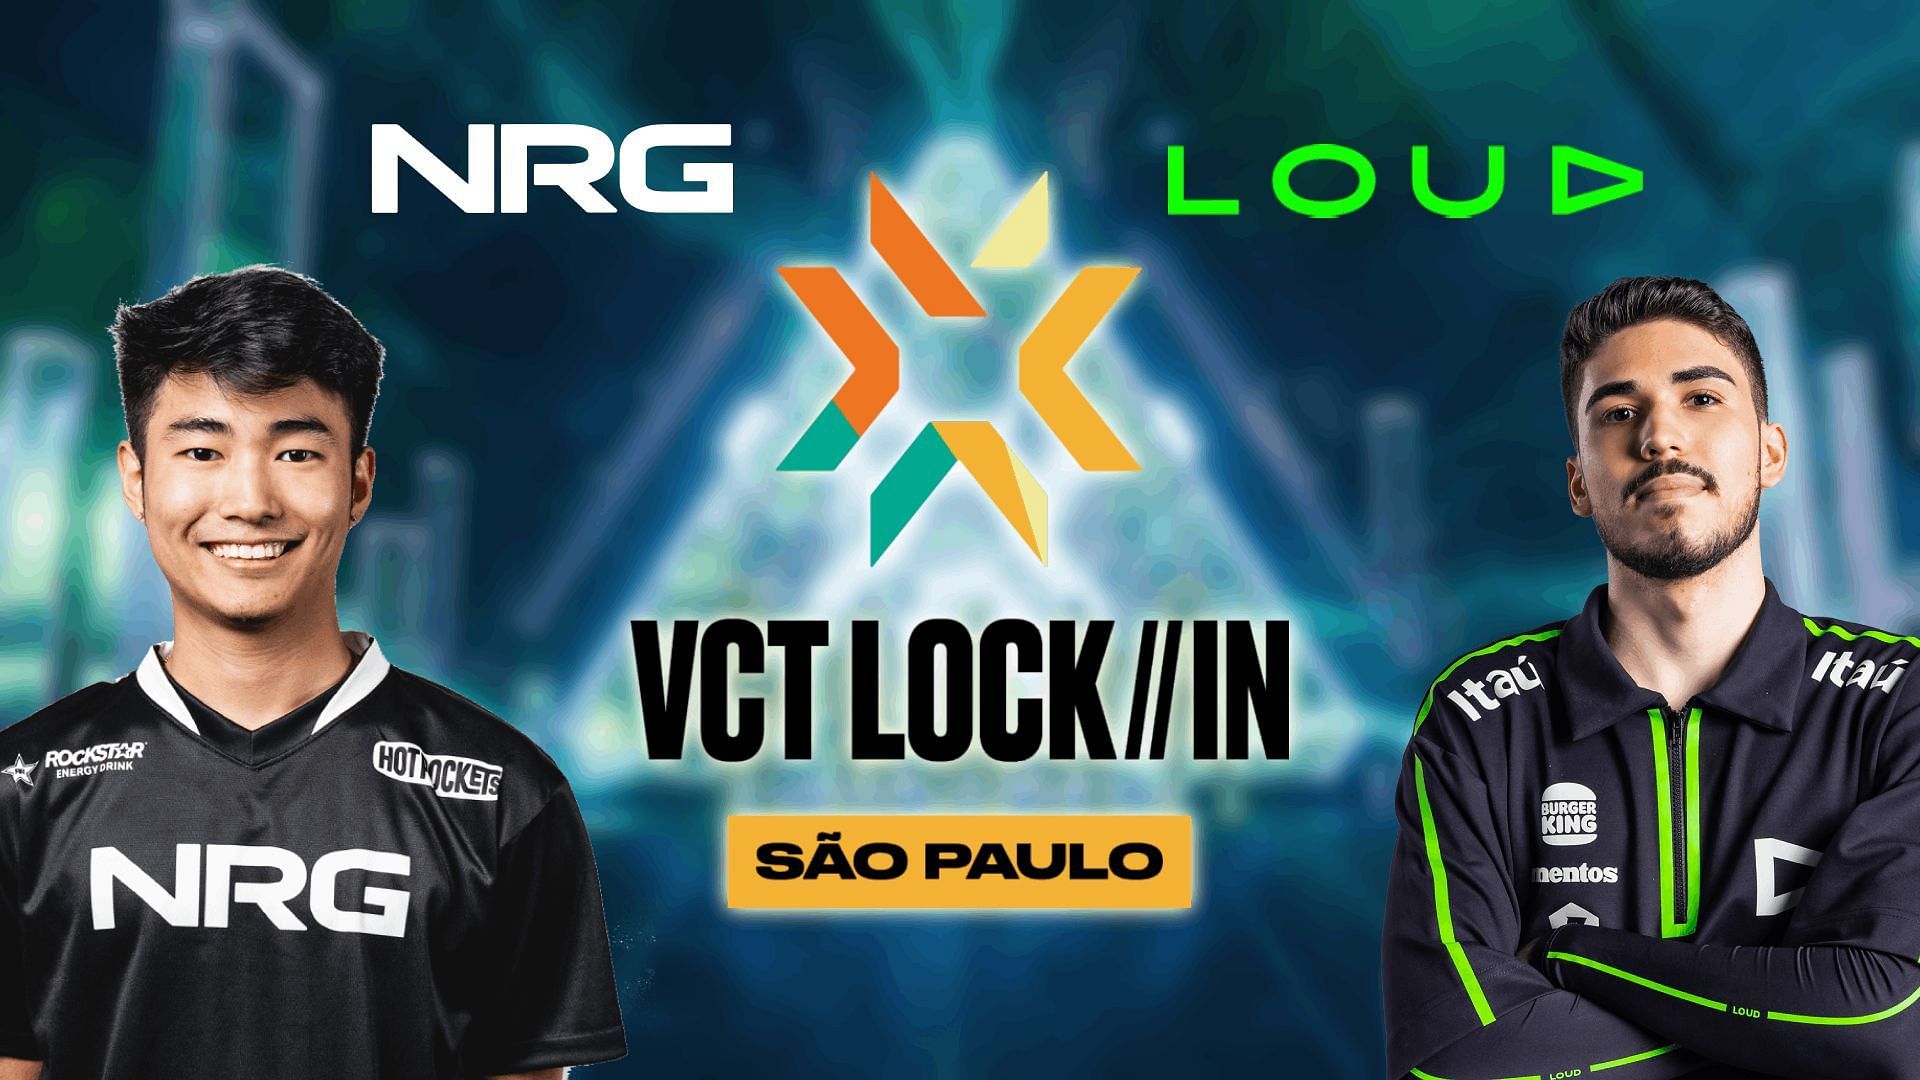 LOUD and NRG Esports will be going up against each other for the first time in the VCT LOCK//IN Alpha group (Image via Sportskeeda)